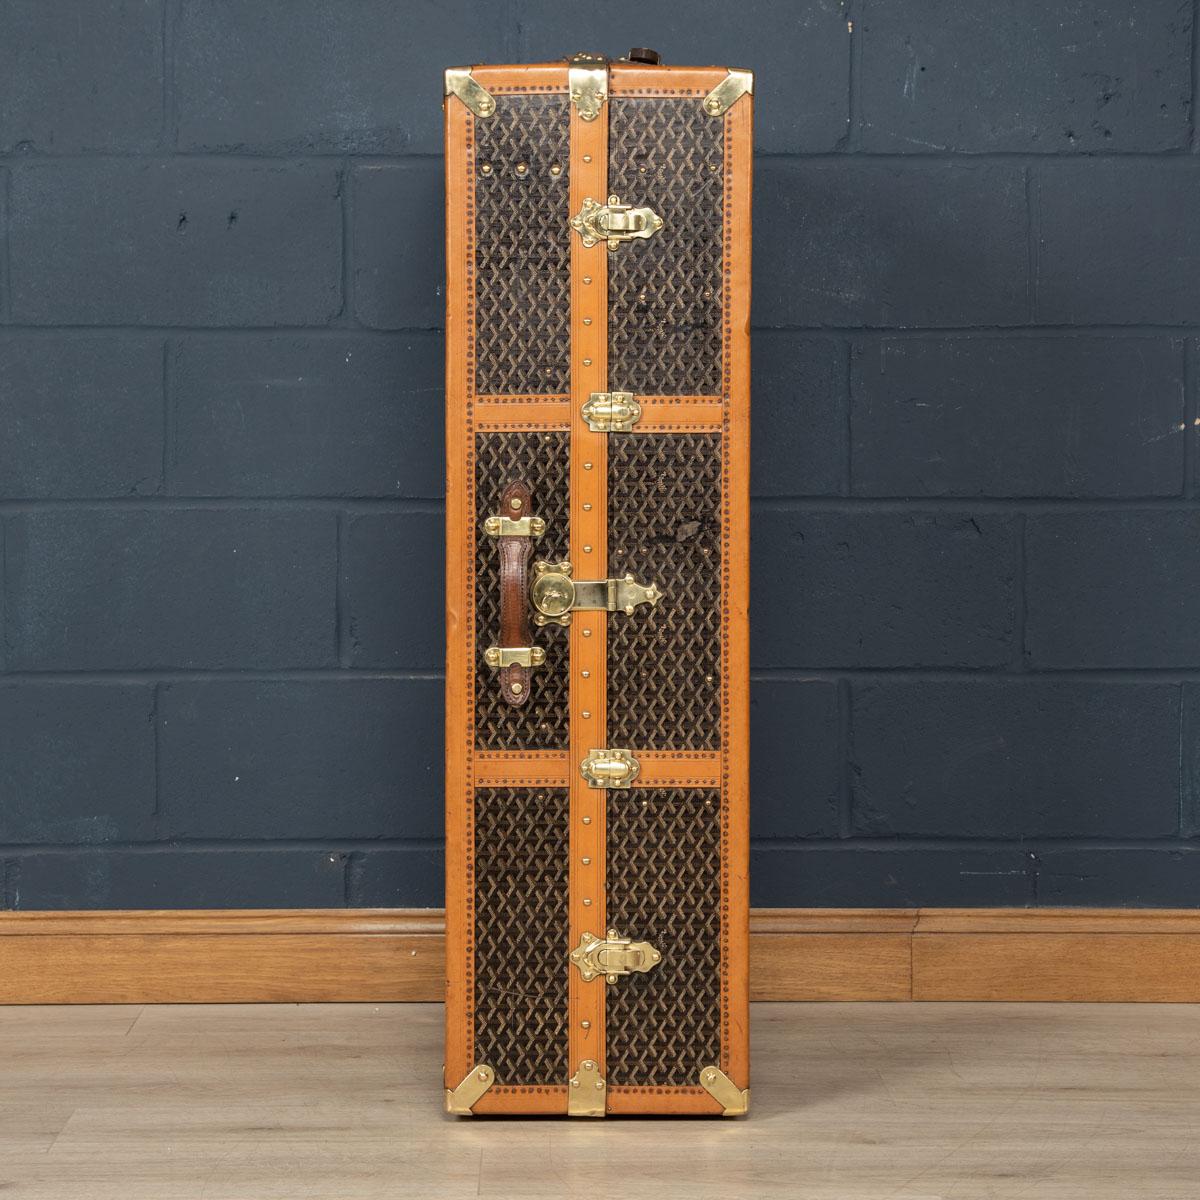 A large Goyard domed top wardrobe trunk in fabulous condition, completely original and with great character, opening to reveal a hanging compartment to the left and a set of drawers to the right hand side.

CONDITION
In Great Condition - wear as